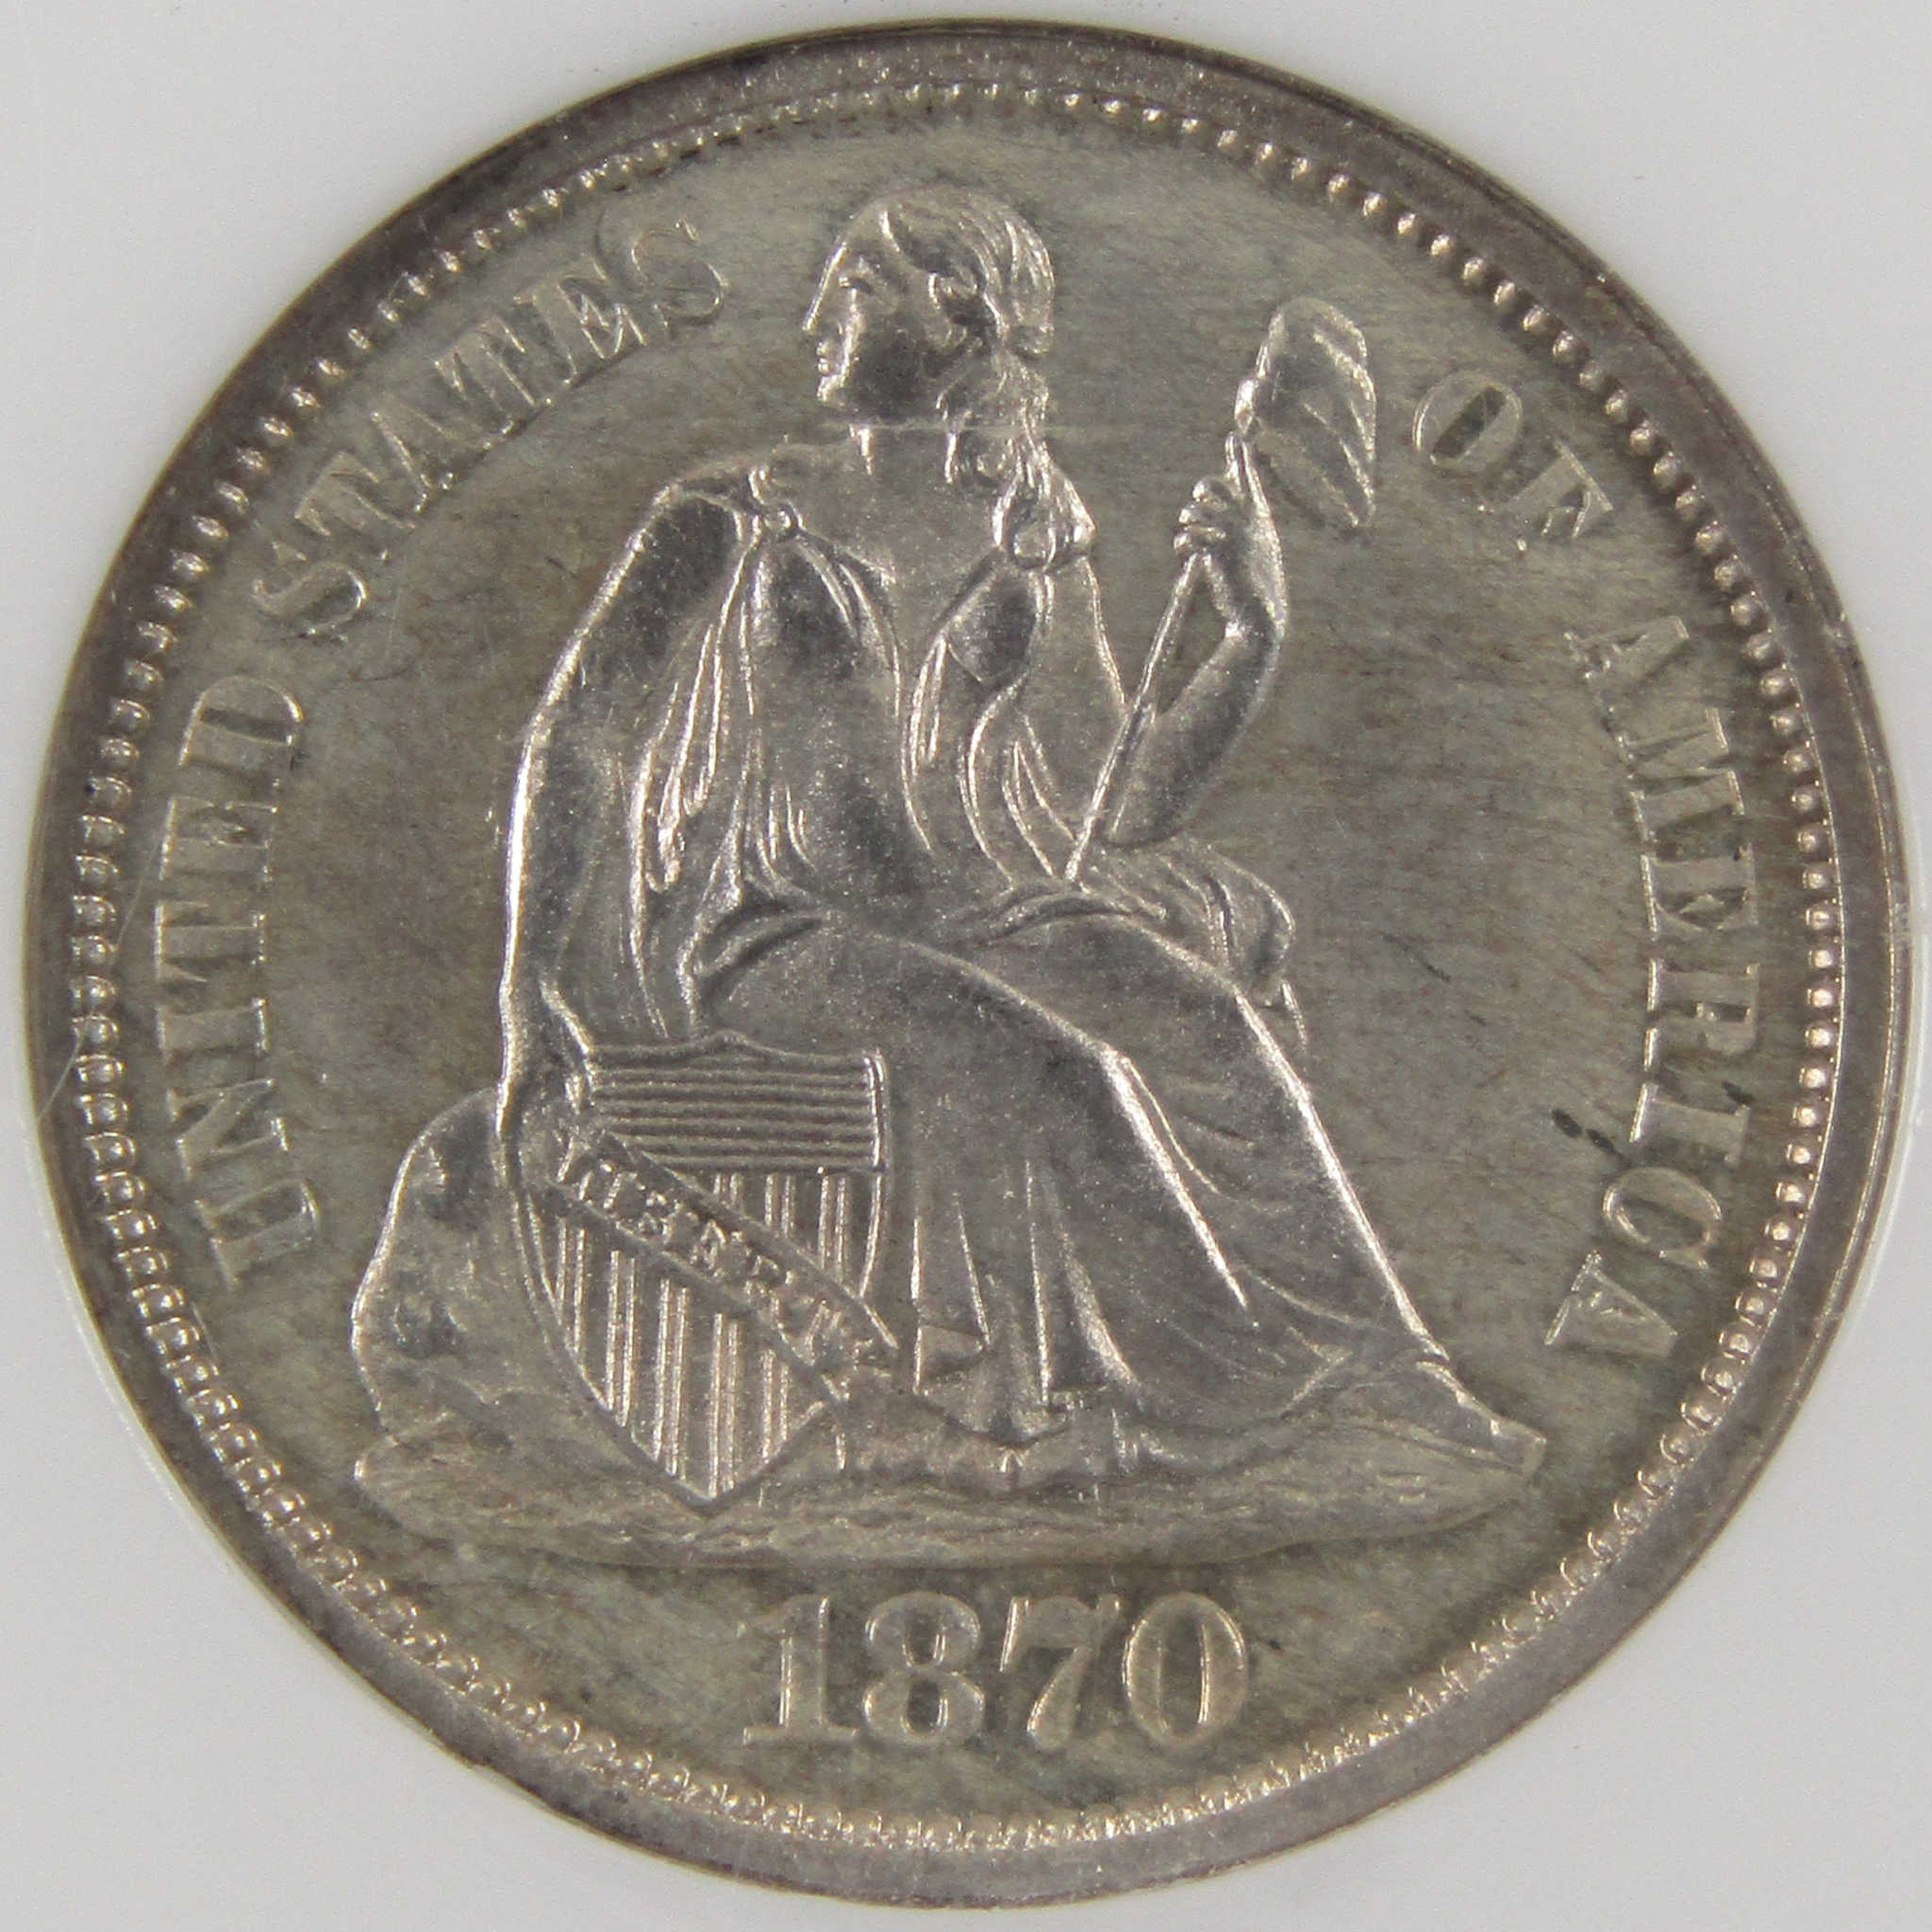 1870 Seated Liberty Dime PF 63 NGC 90% Silver 10c Proof Coin SKU:I9751